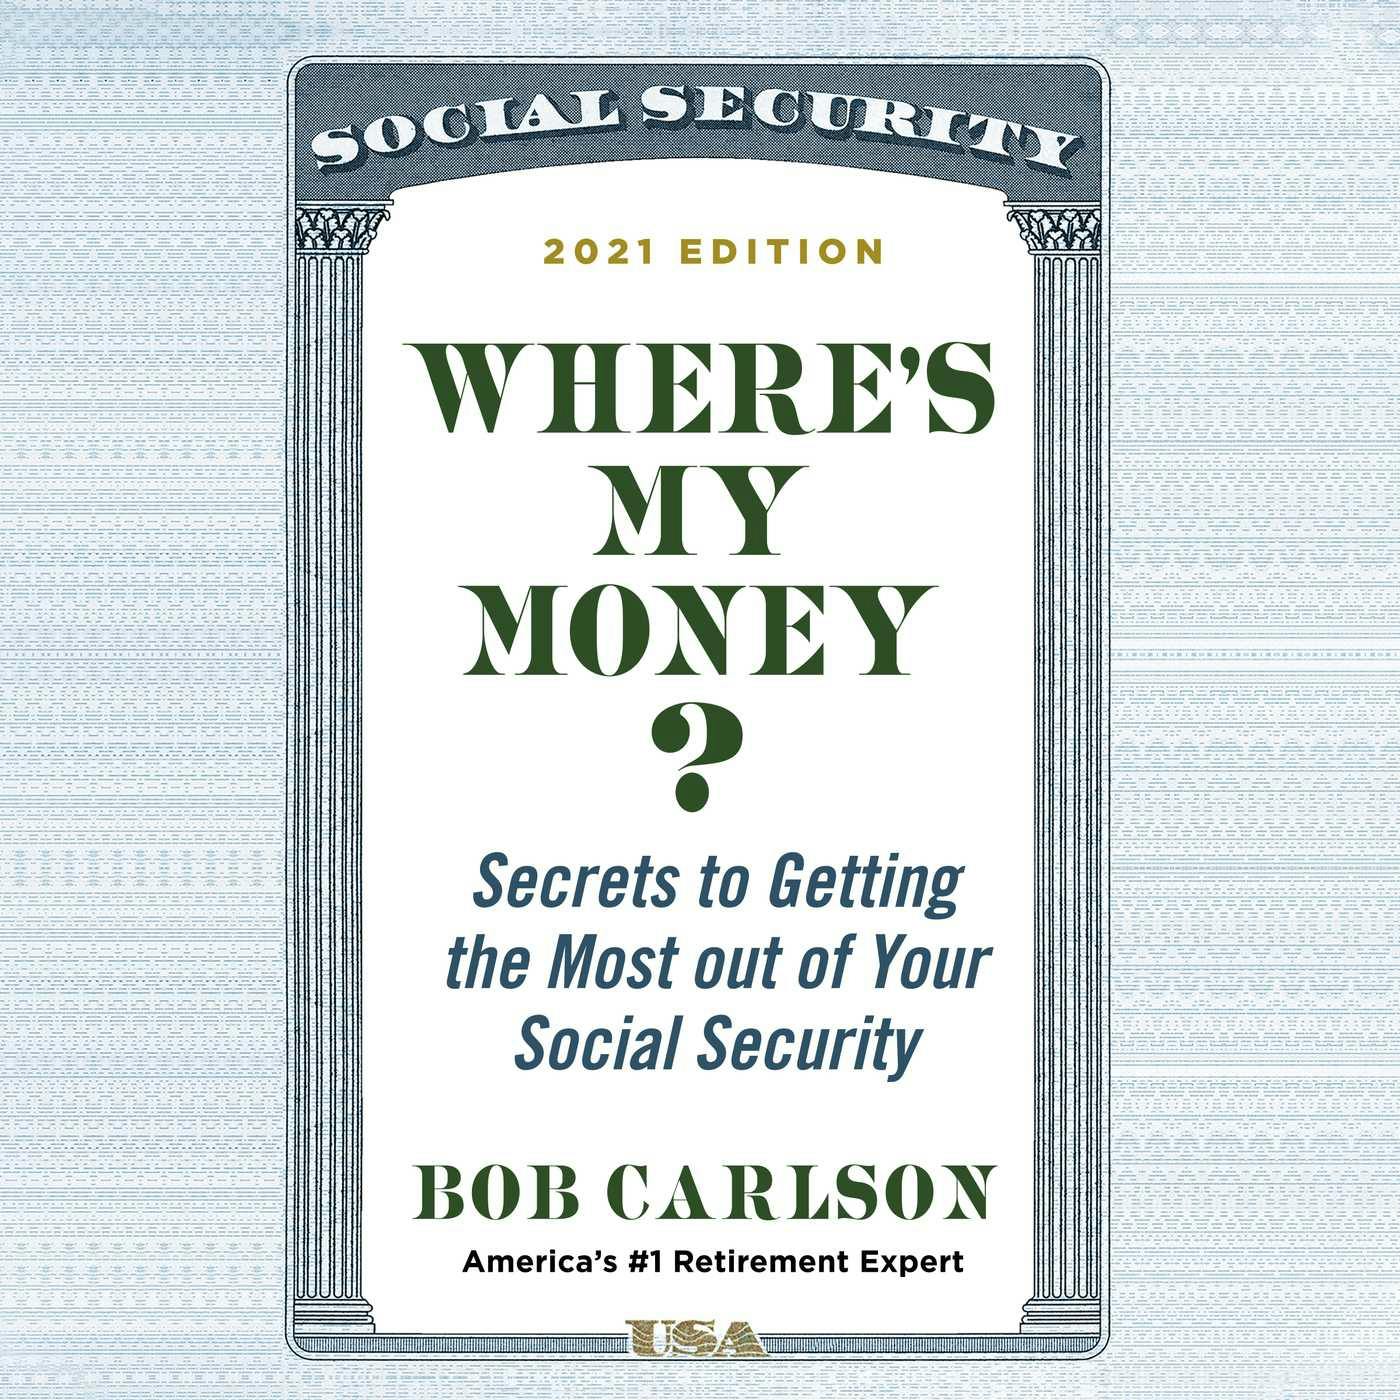 Where's My Money? - Secrets to Getting the Most out of Your Social Security (Unabridged) - Bob Carlson